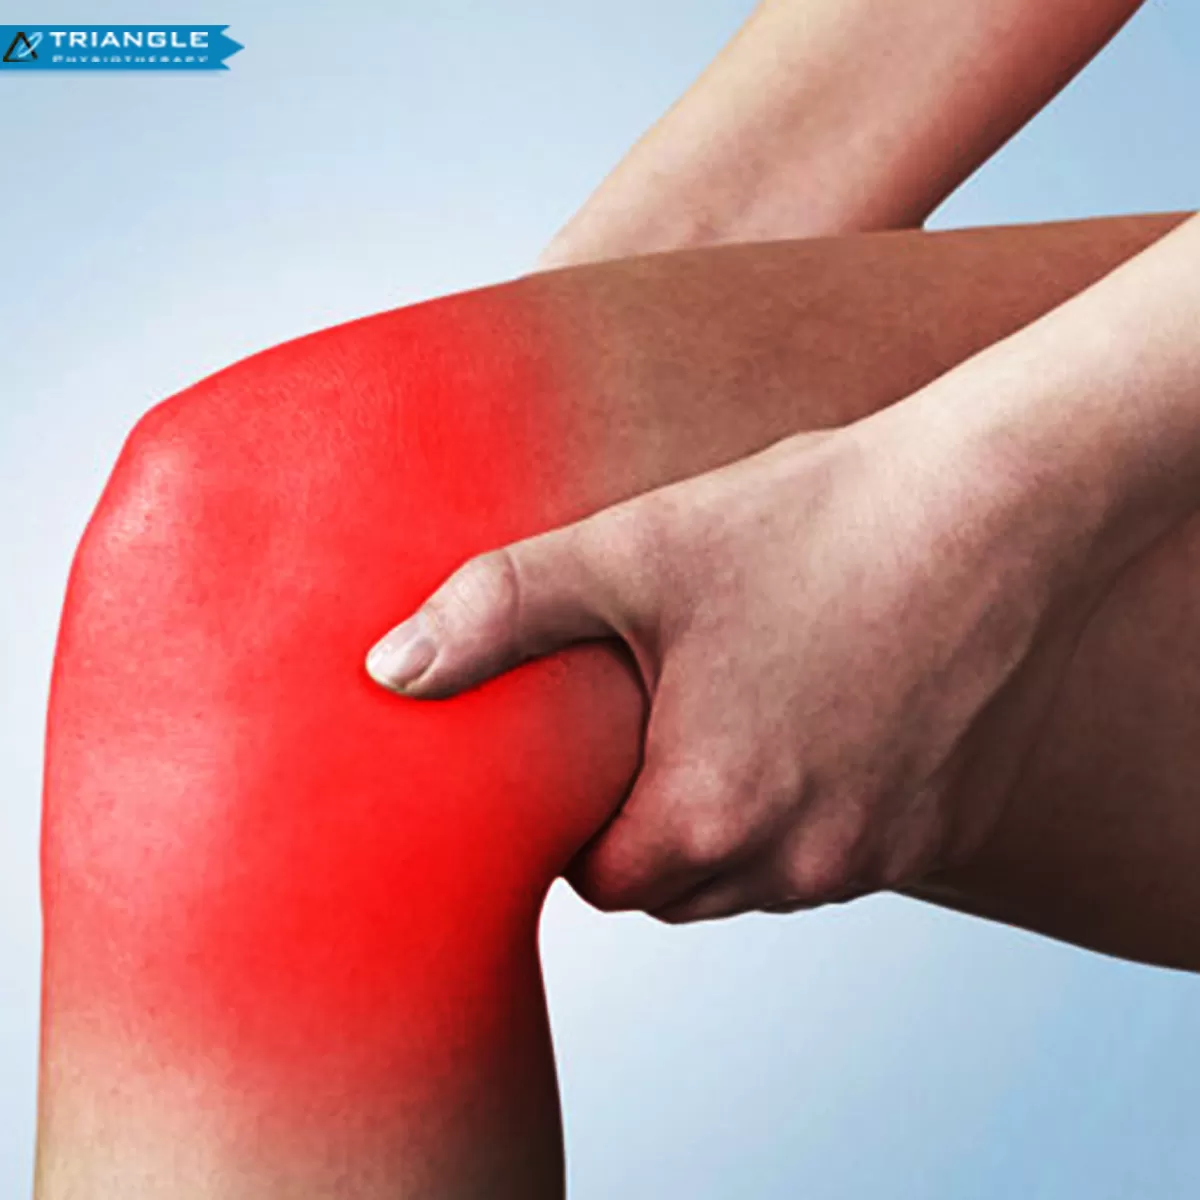 ACL Sprain: Facts and Treatment